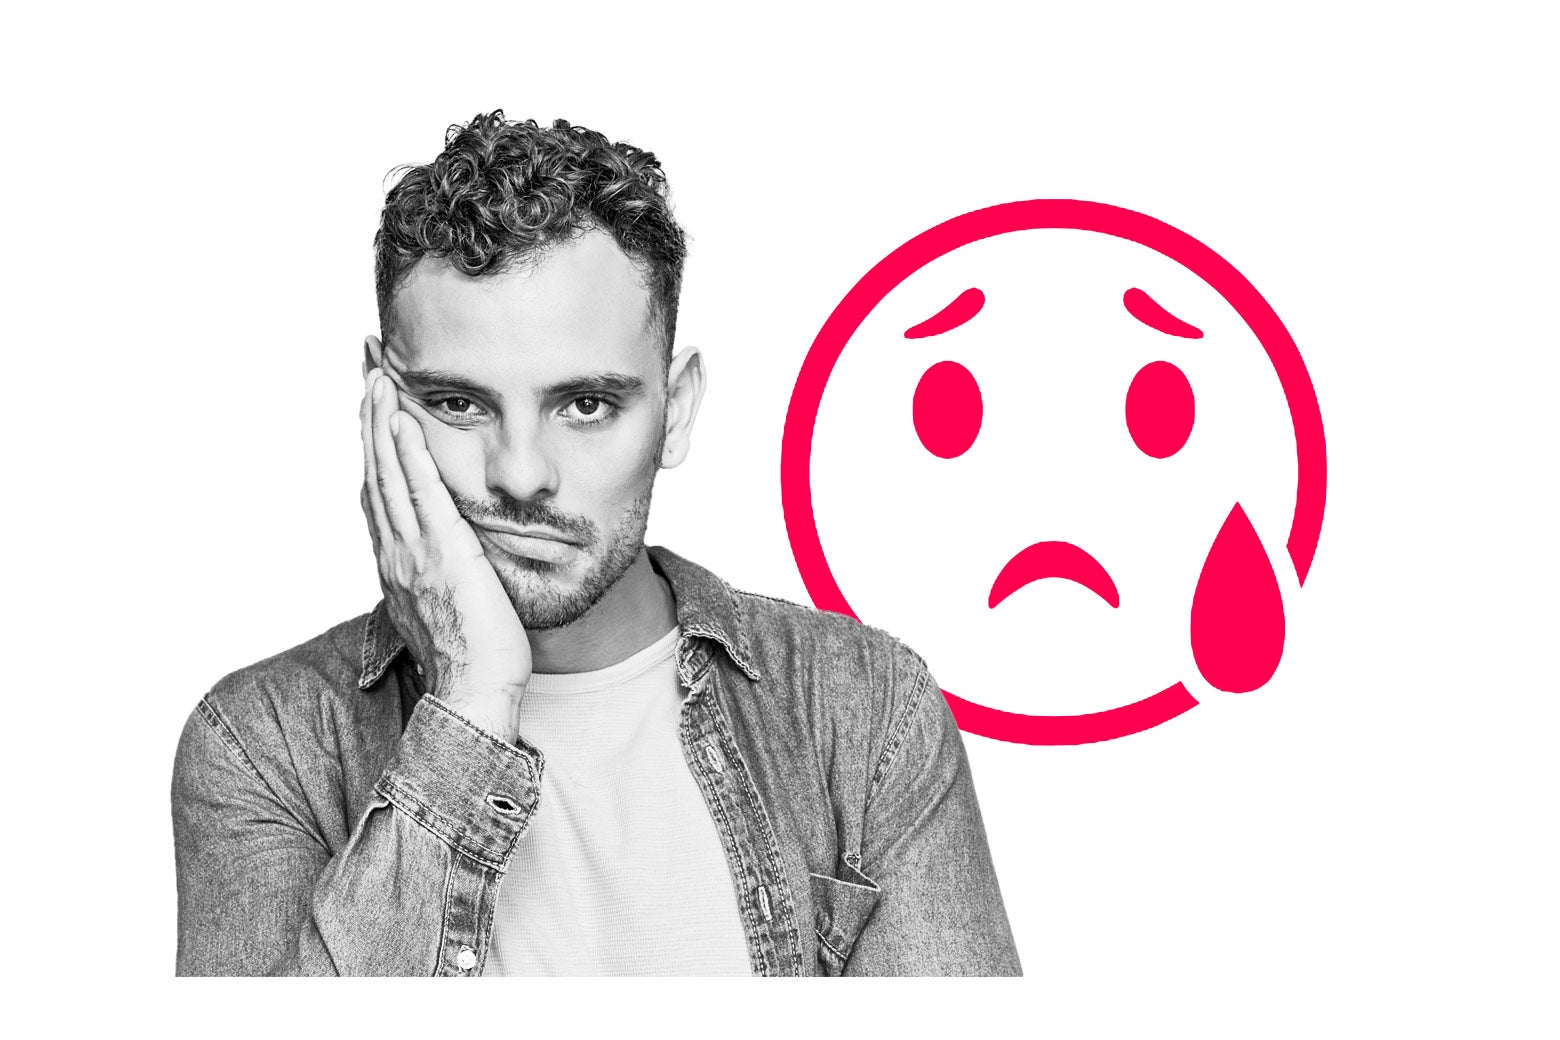 A young man looks frustrated next to a crying face emoji.